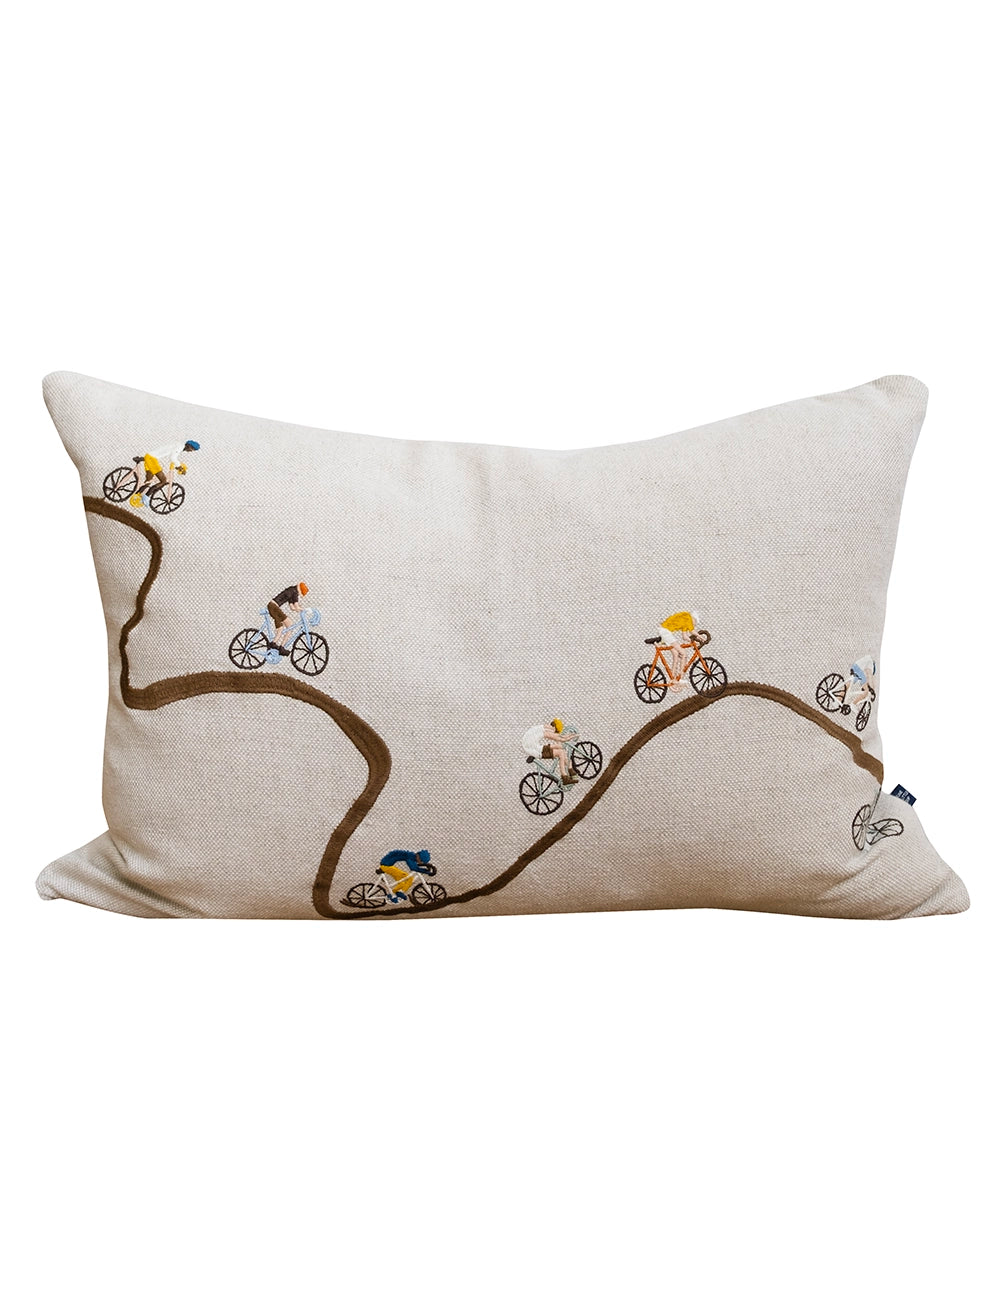 A cut out image of a rectangular cushion in natural linen with an embroidered path and cyclists from Fine Little Day 